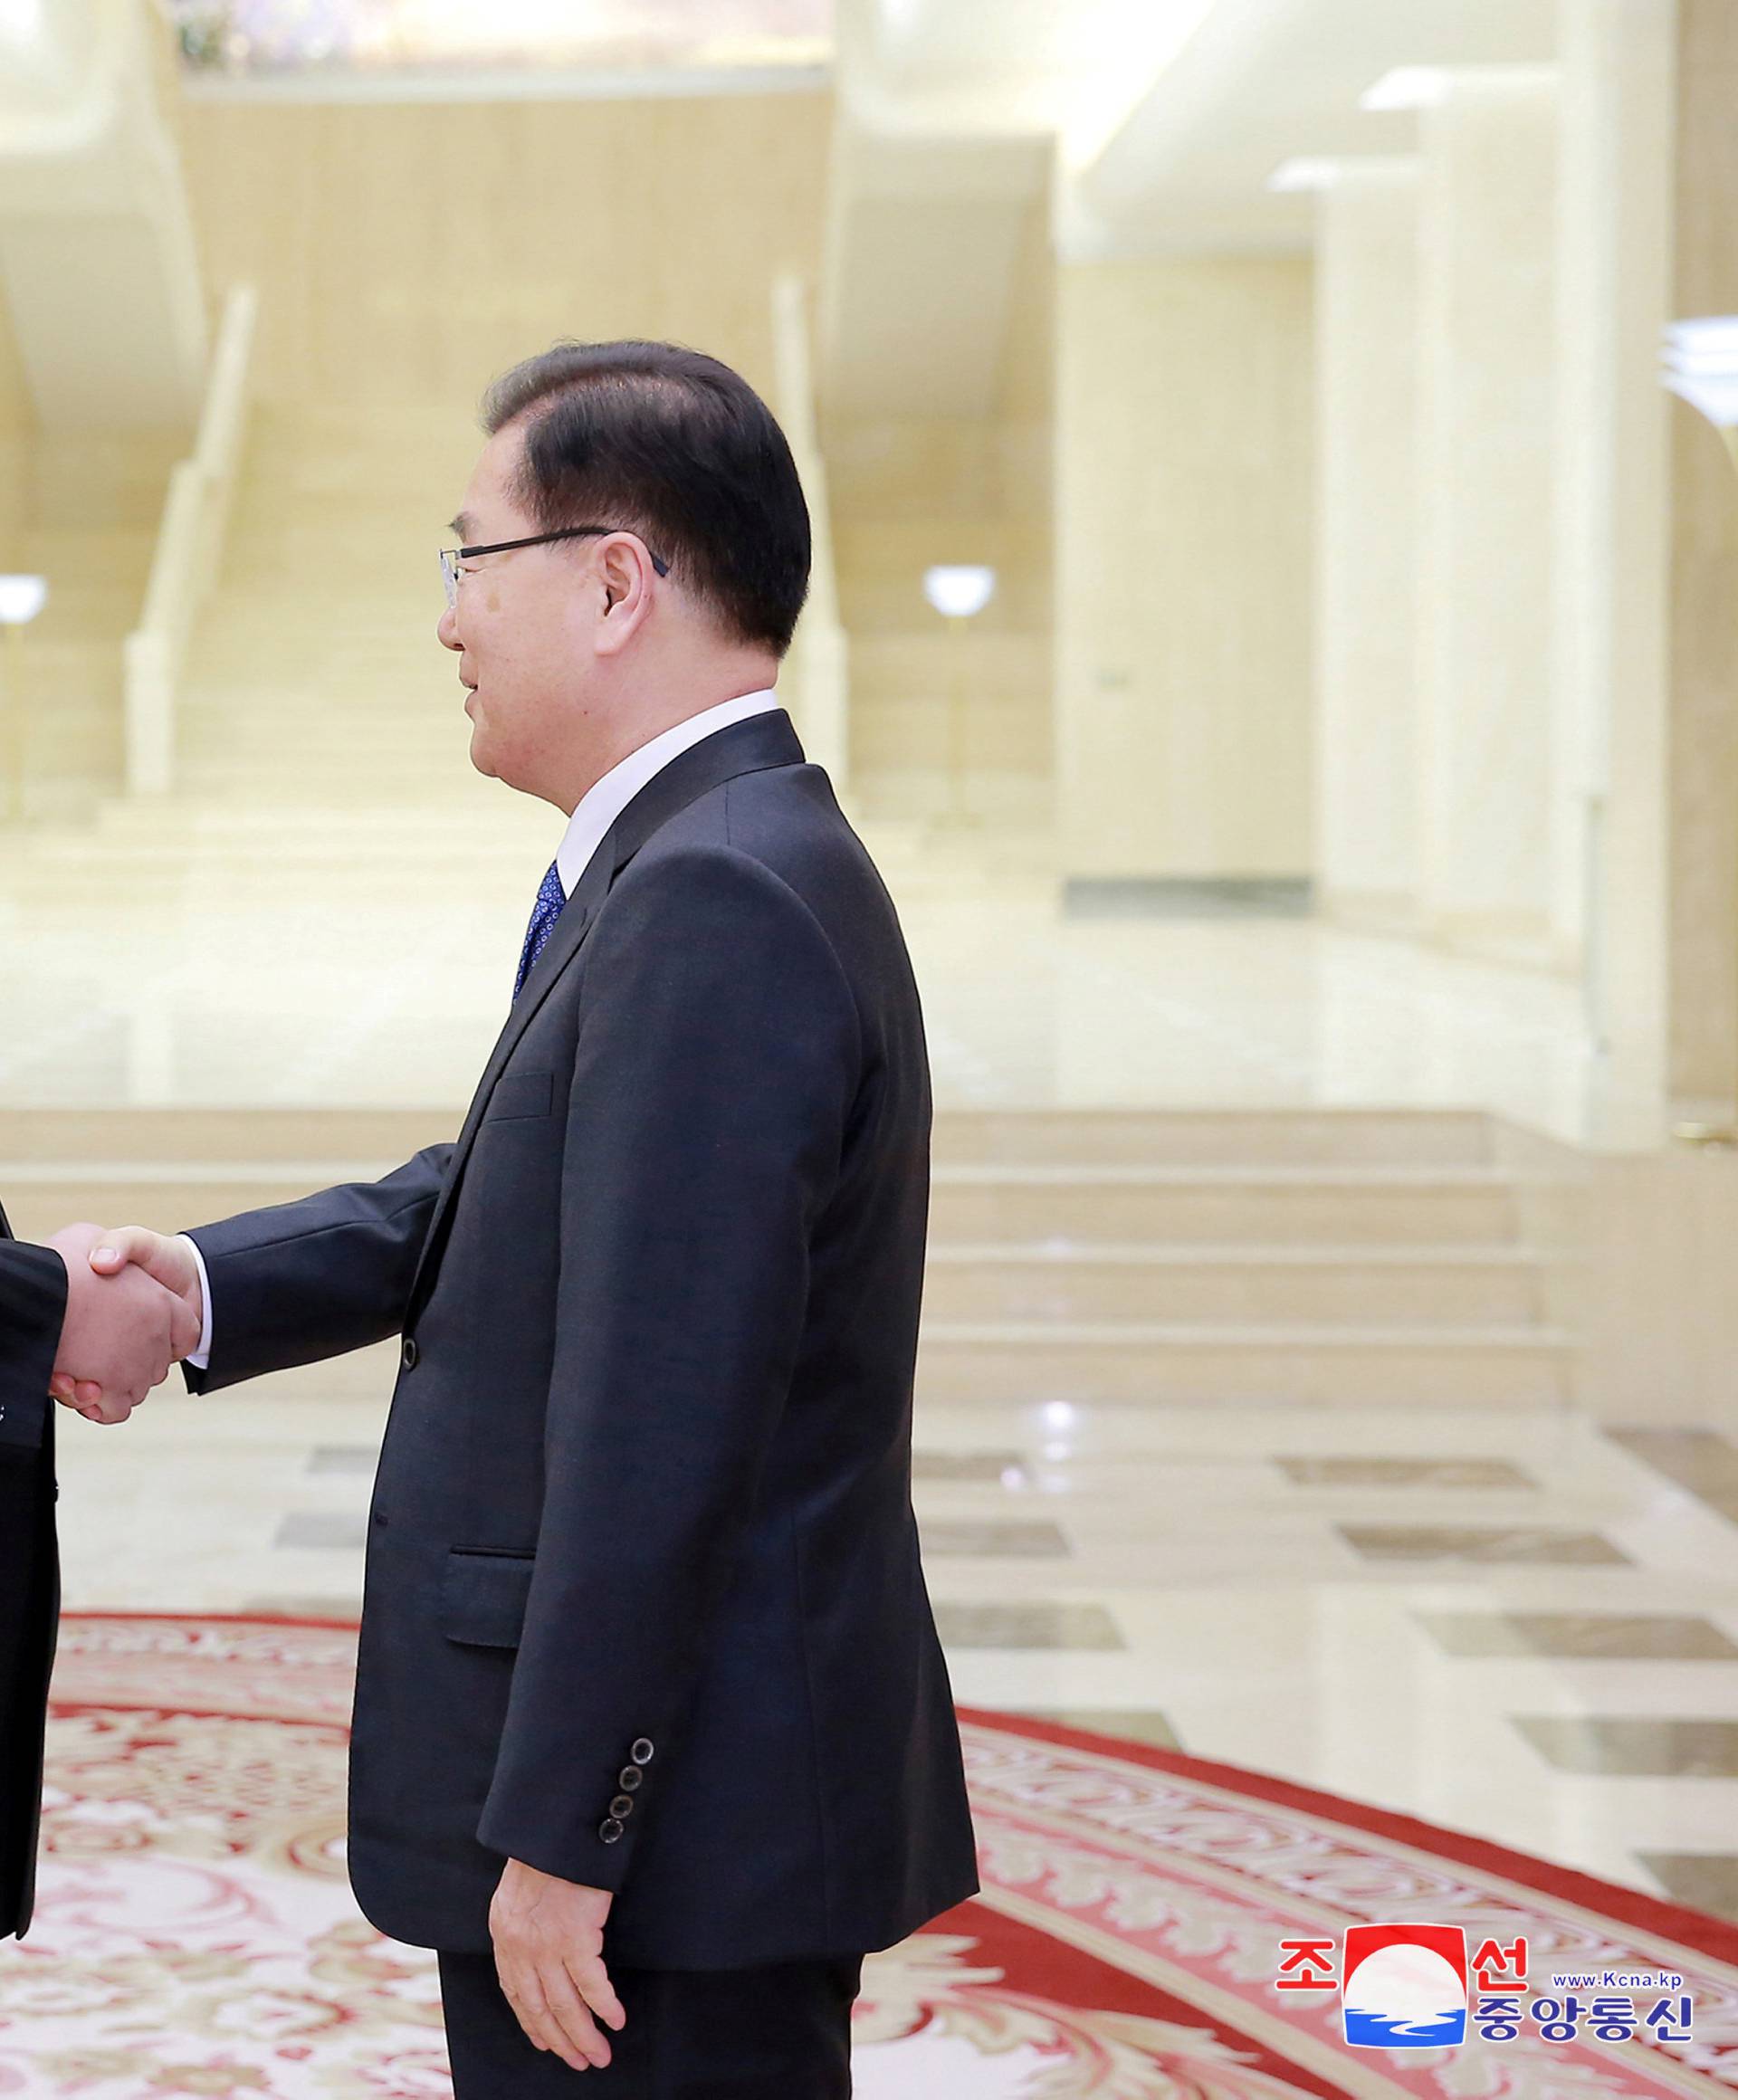 North Korean leader Kim Jong Un shakes hands with Chung Eui-yong in this photo released by North Korea's Korean Central News Agency